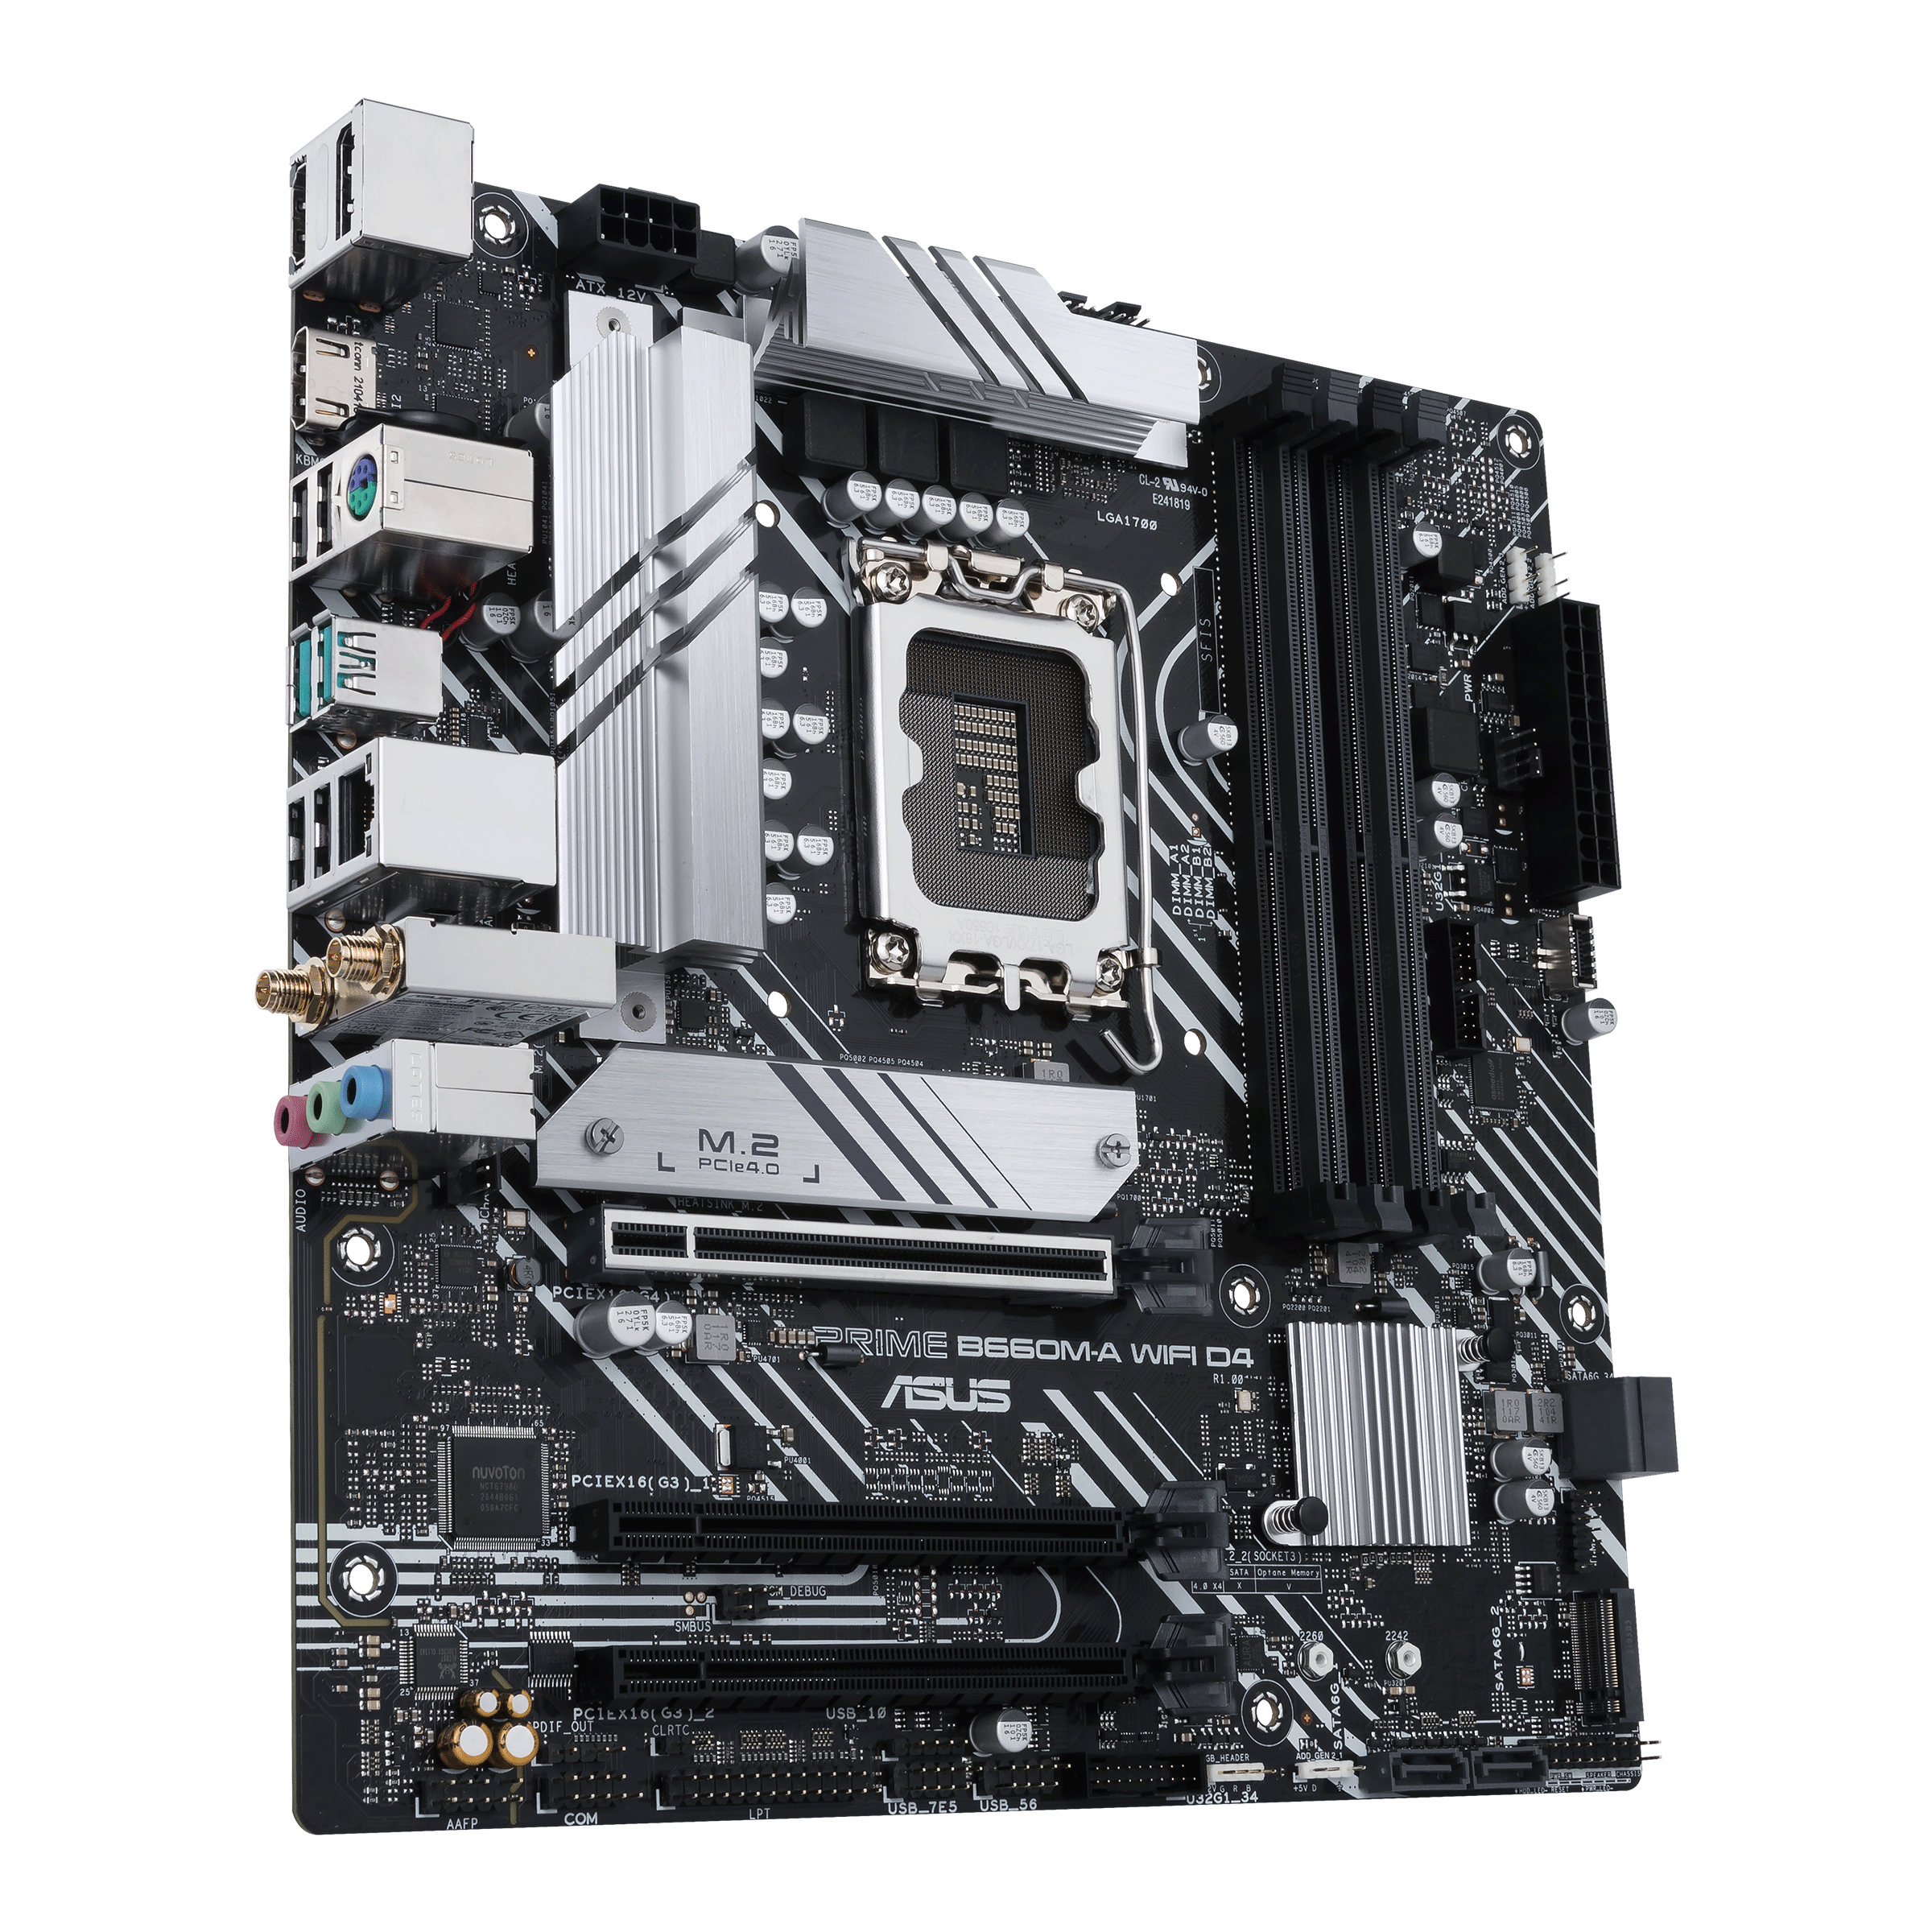 PRIME B660M-A WIFI D4｜Motherboards｜ASUS USA